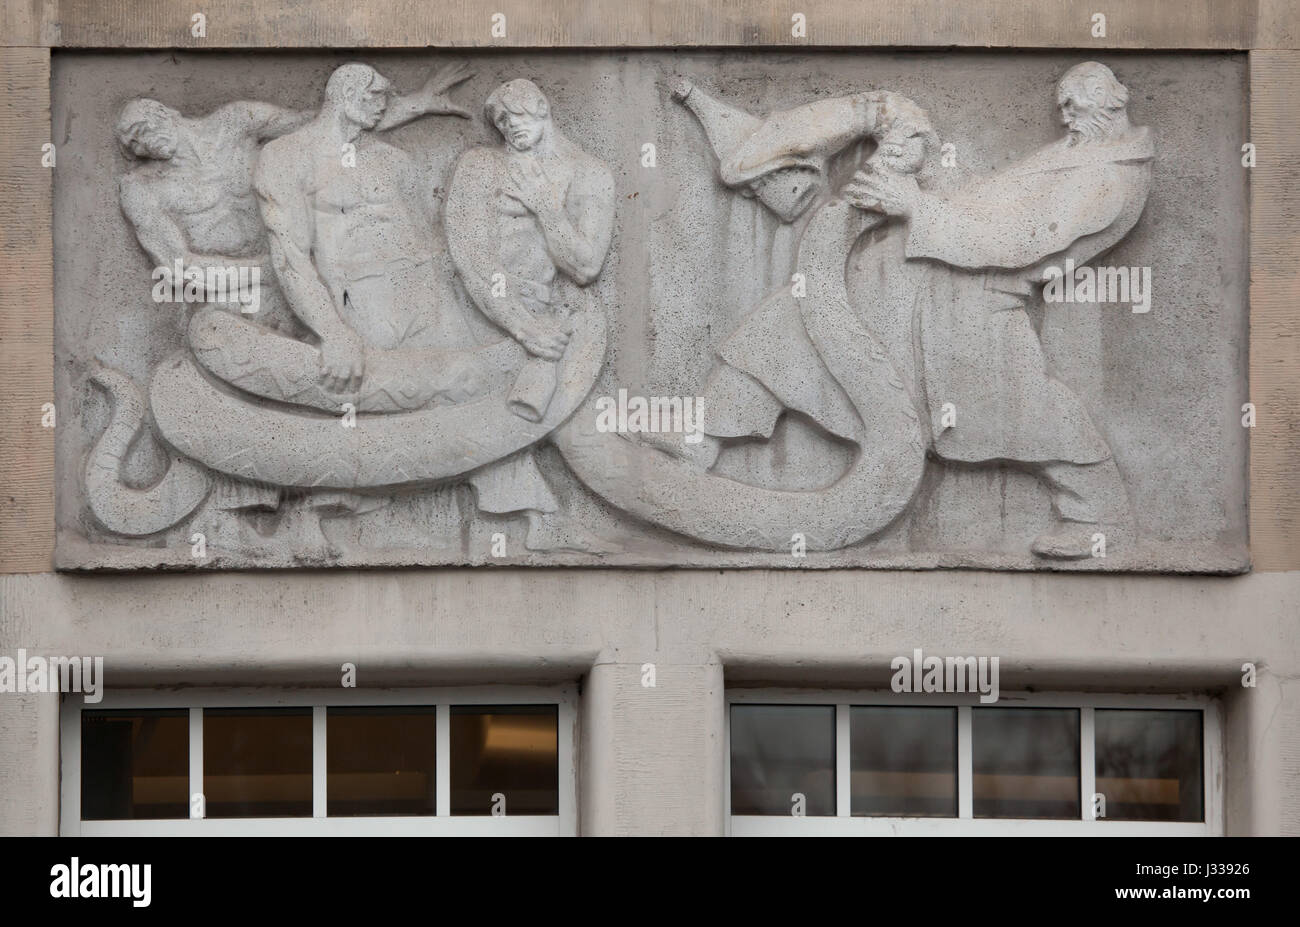 Fighting with the alcohol dependence syndrome. Relief by Hungarian sculptor Mihaly Biro on the south wing of the Art Nouveau building of the Budapest Workers Insurance Fund in Budapest, Hungary. The building, now used as the seat of the National Social Insurance Centre (OTI), was designed by Hungarian architects Marcell Komor and Dezso Jakab and built in 1913. The north wing was added in the 1930s. Stock Photo